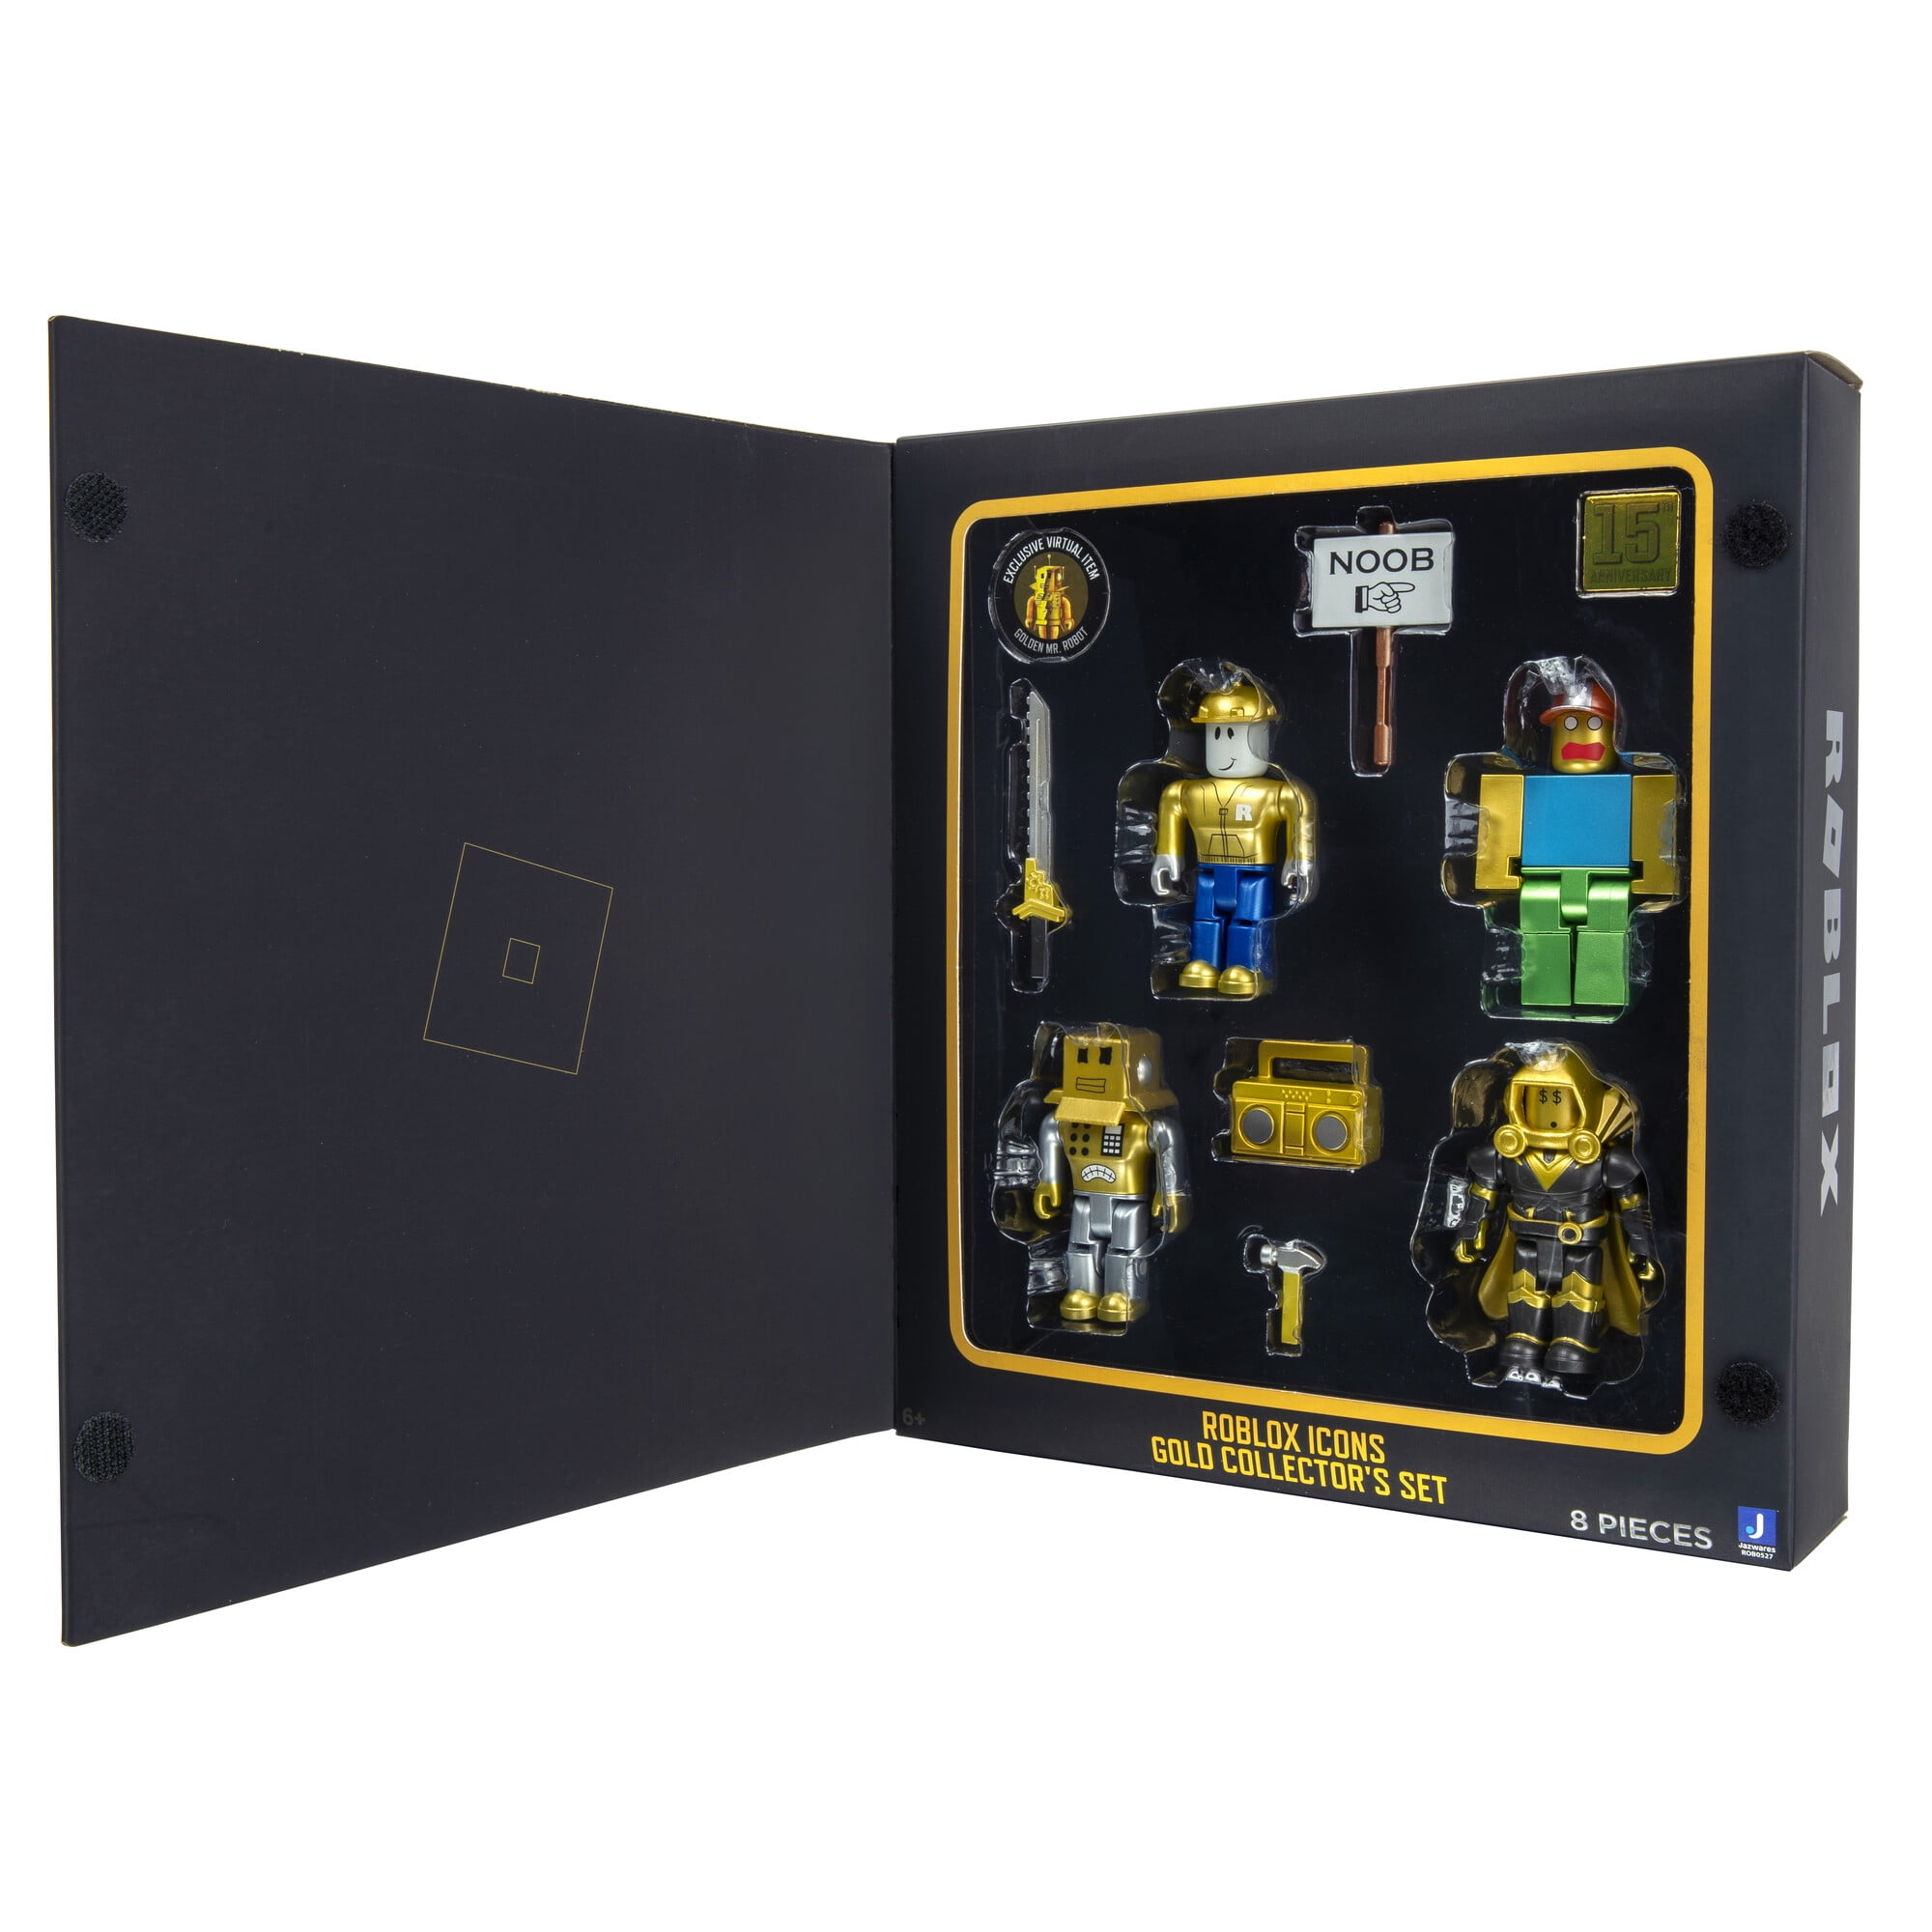 Roblox Action Collection: from The Vault 20 Figure Pack [Includes 20  Exclusive Virtual Items] for 6 years and up, includes One Collector's Set